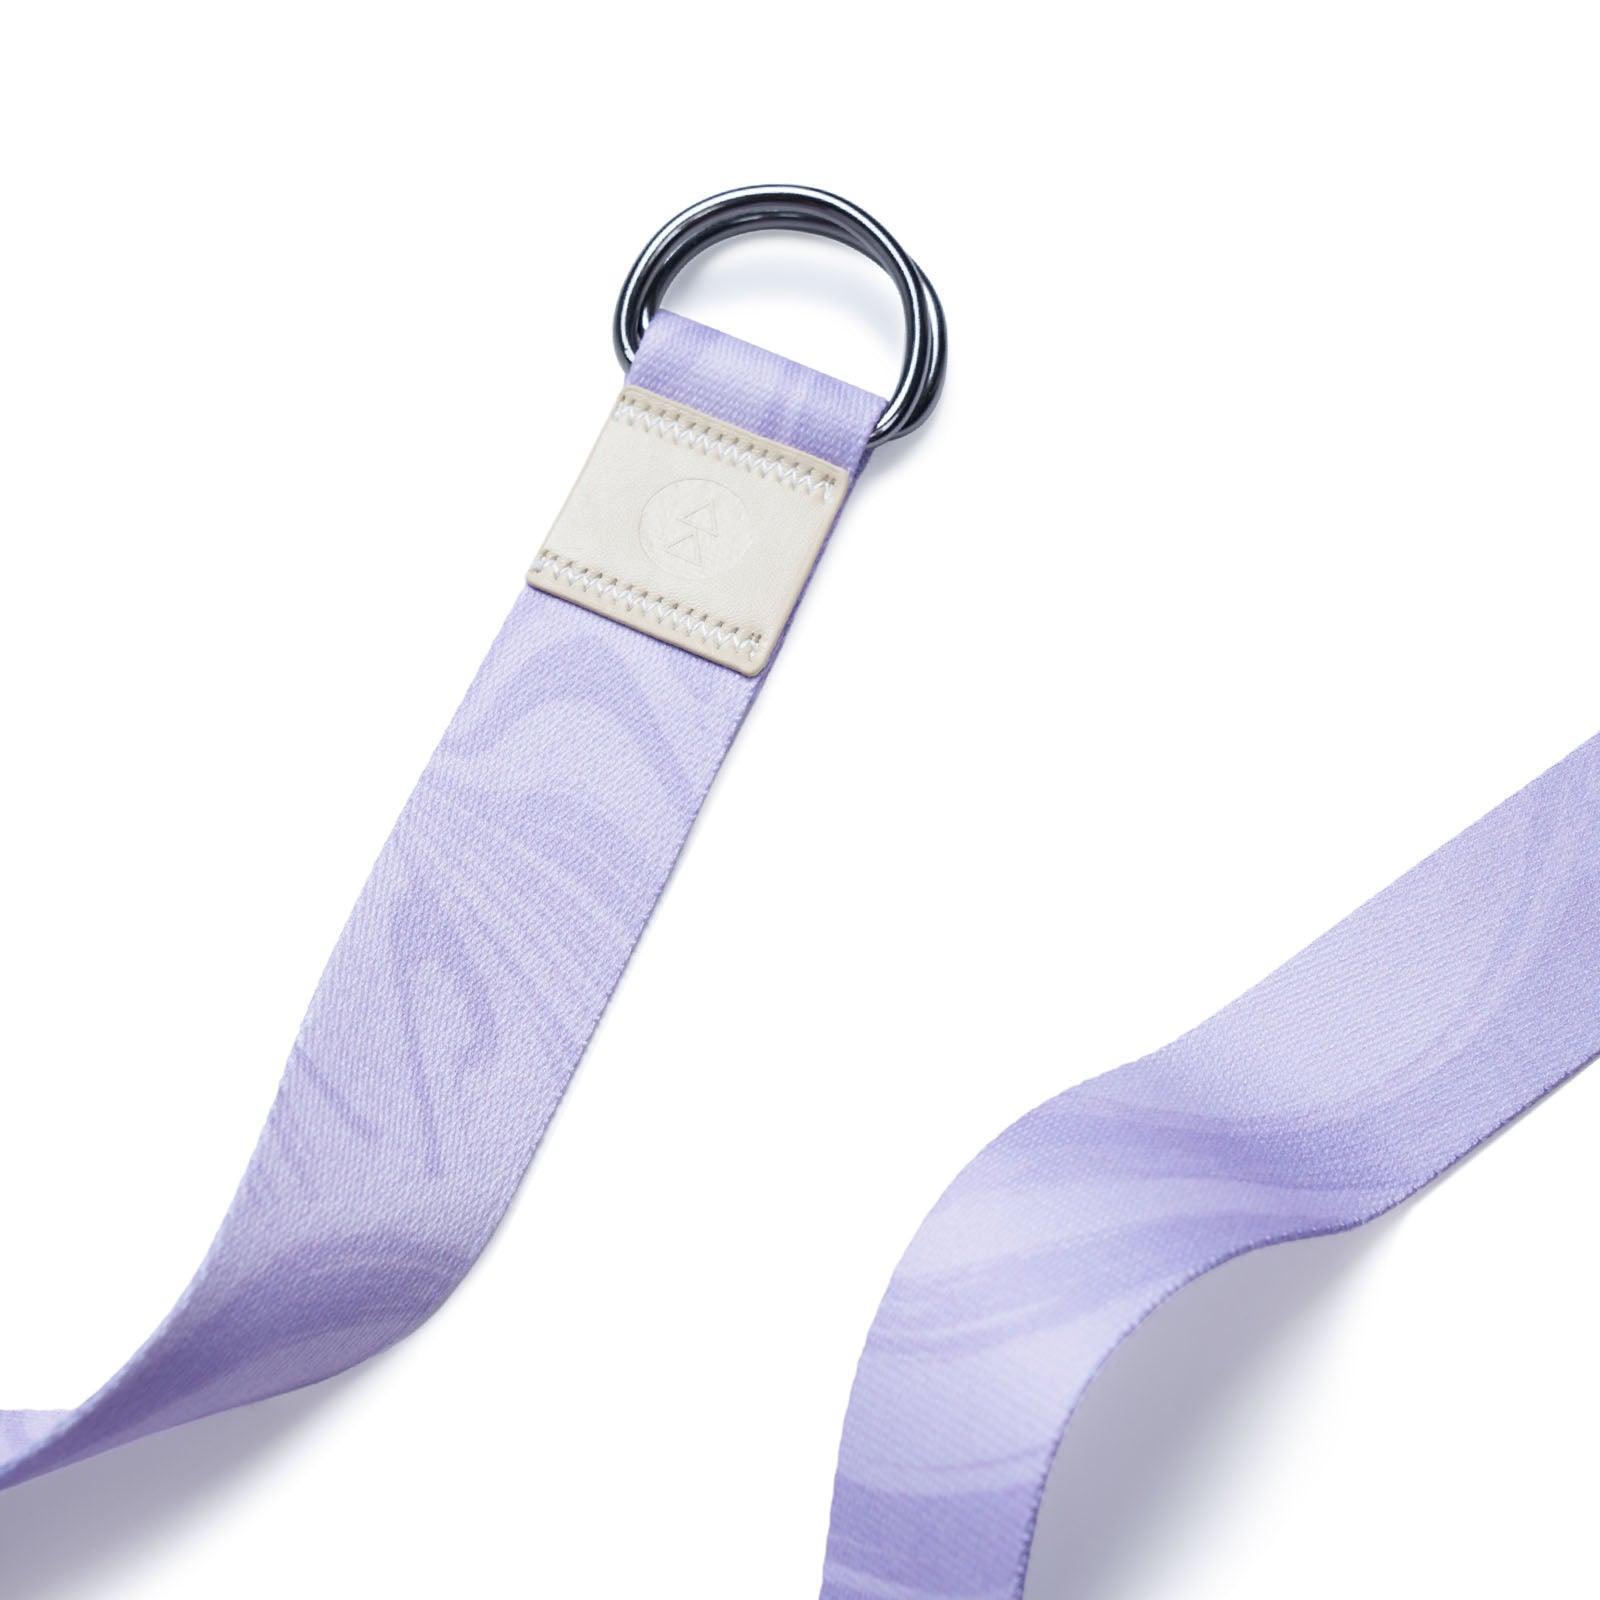 Yoga Strap - Lavender - Best For Stretching, Pilates, Physical Therapy - Yoga Design Lab 